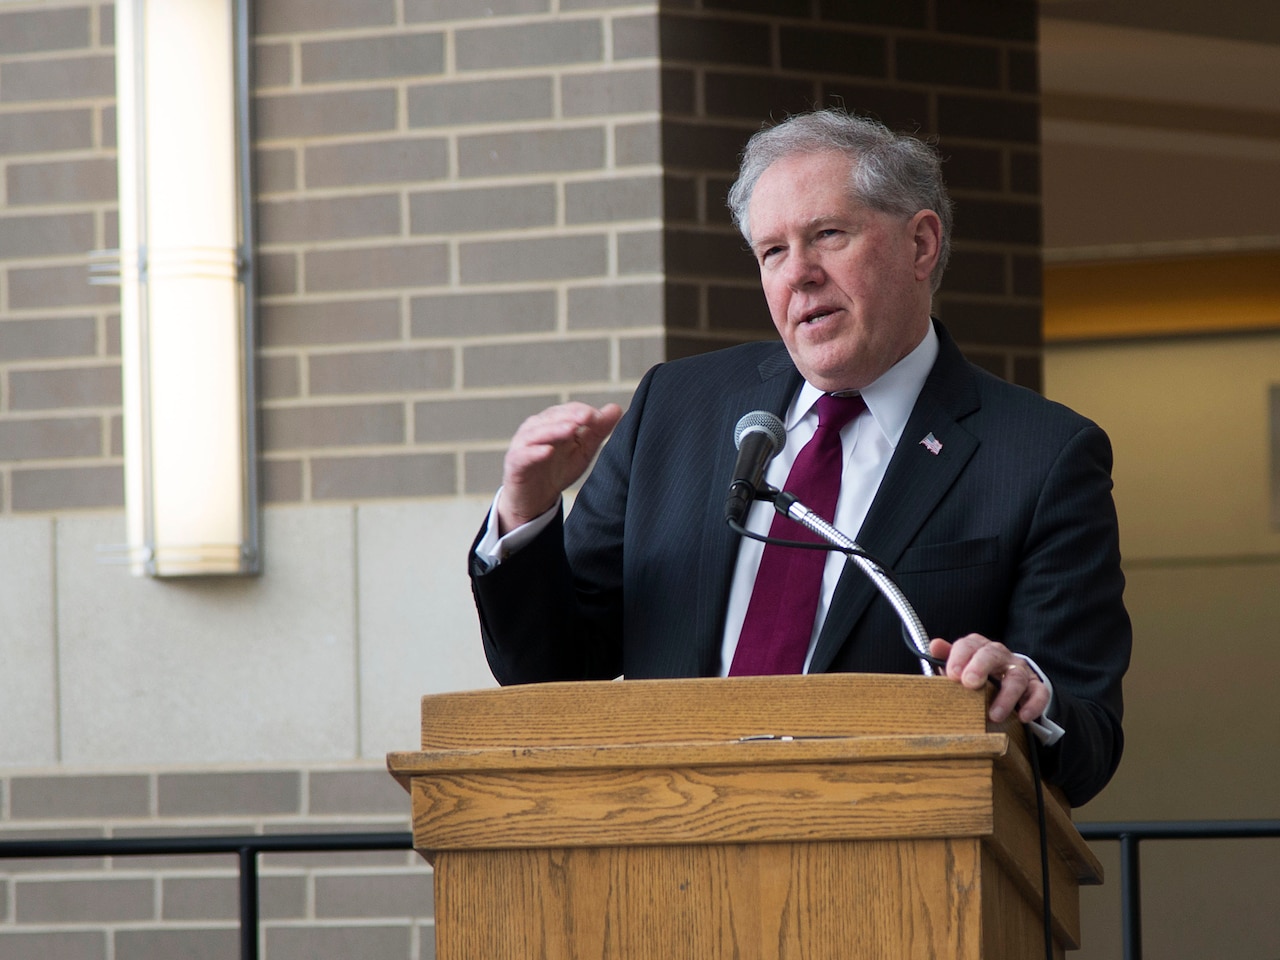 Undersecretary of Defense for Acquisition, Technology and Logistics Frank Kendall speaks to members of the U.S. Navy Naval Air Systems Command workforce at Naval Air Station Patuxent River, Md., March 31, 2015. U.S. Navy photo by Noel Hepp